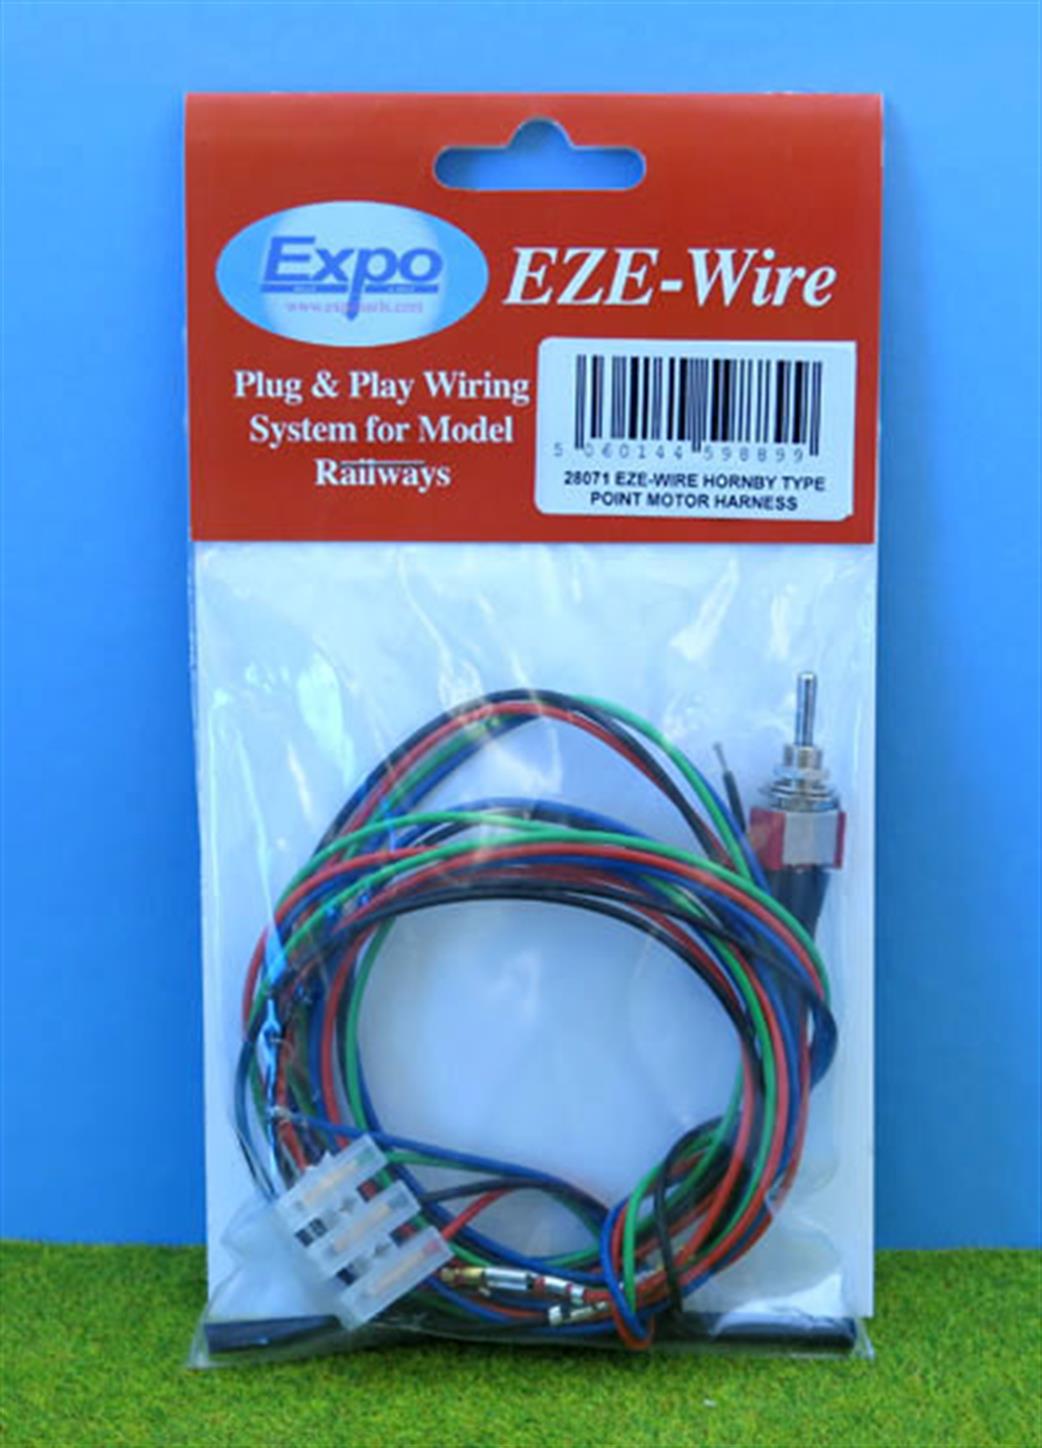 Expo  28071 EZE-Wire Point Switch with Hornby Point Motor Harness